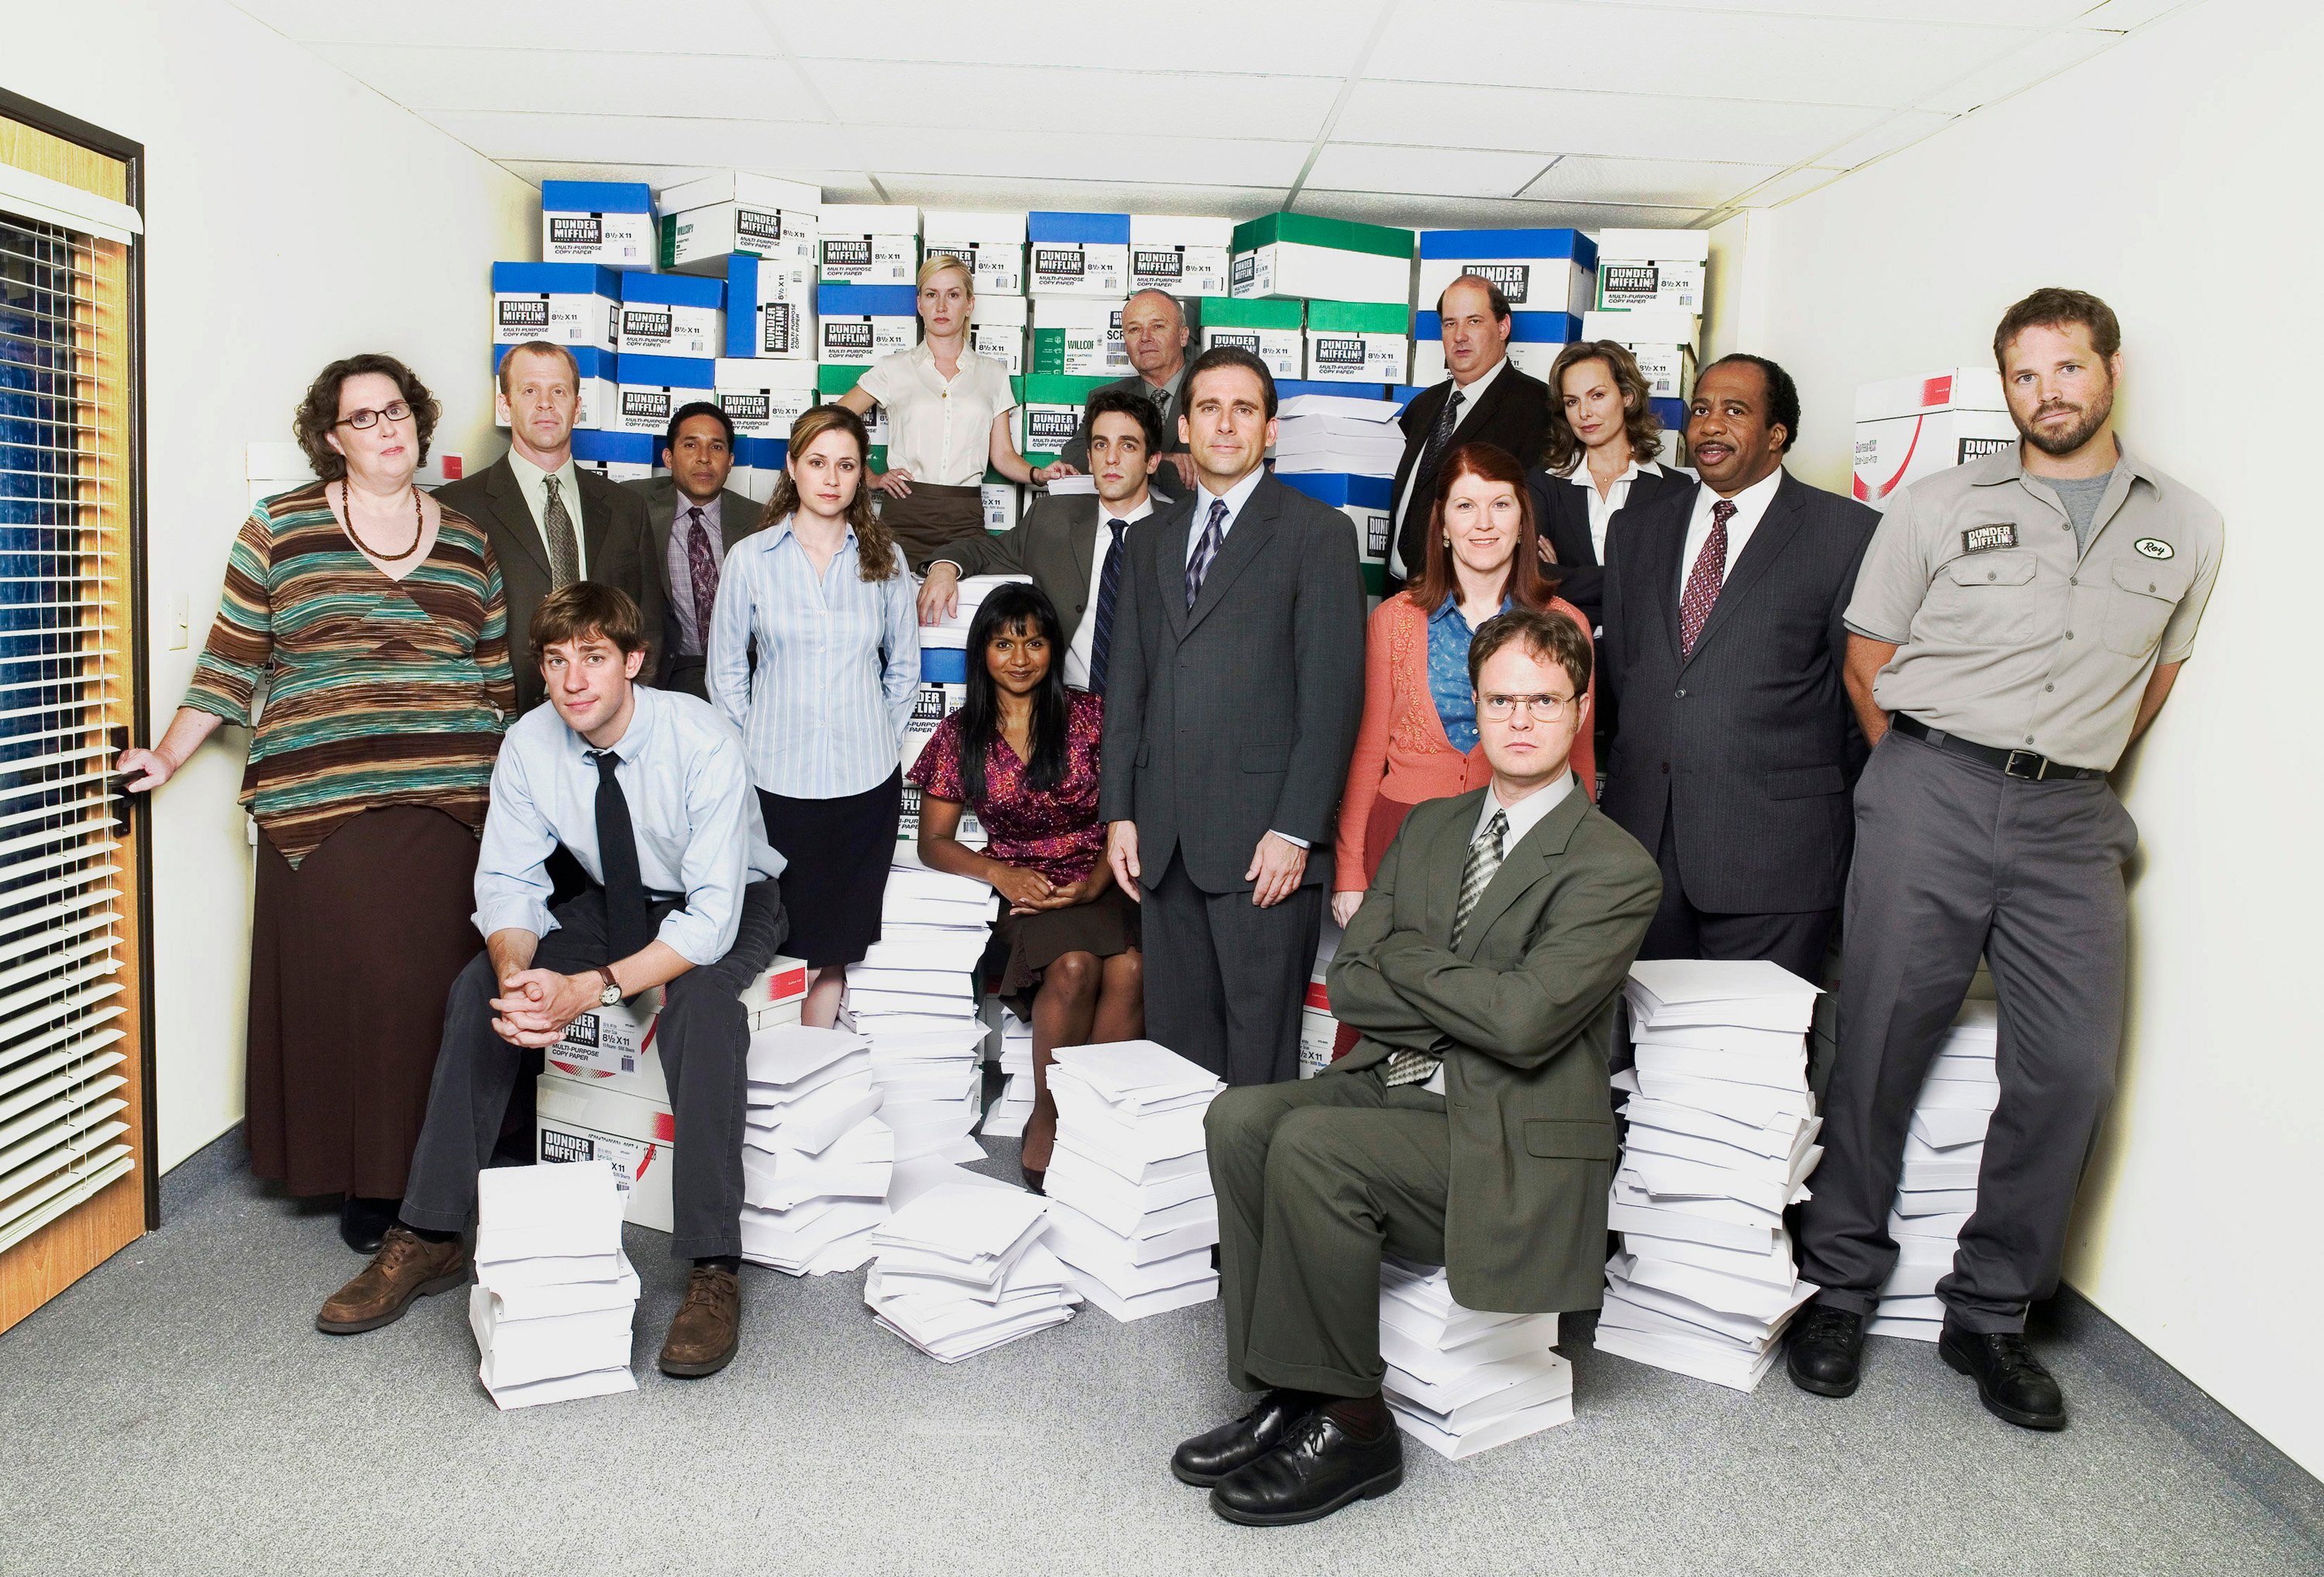 The cast of "The Office' – one of the premier comedy shows – poses for a photo around stacks if Dunder Mifflin paper